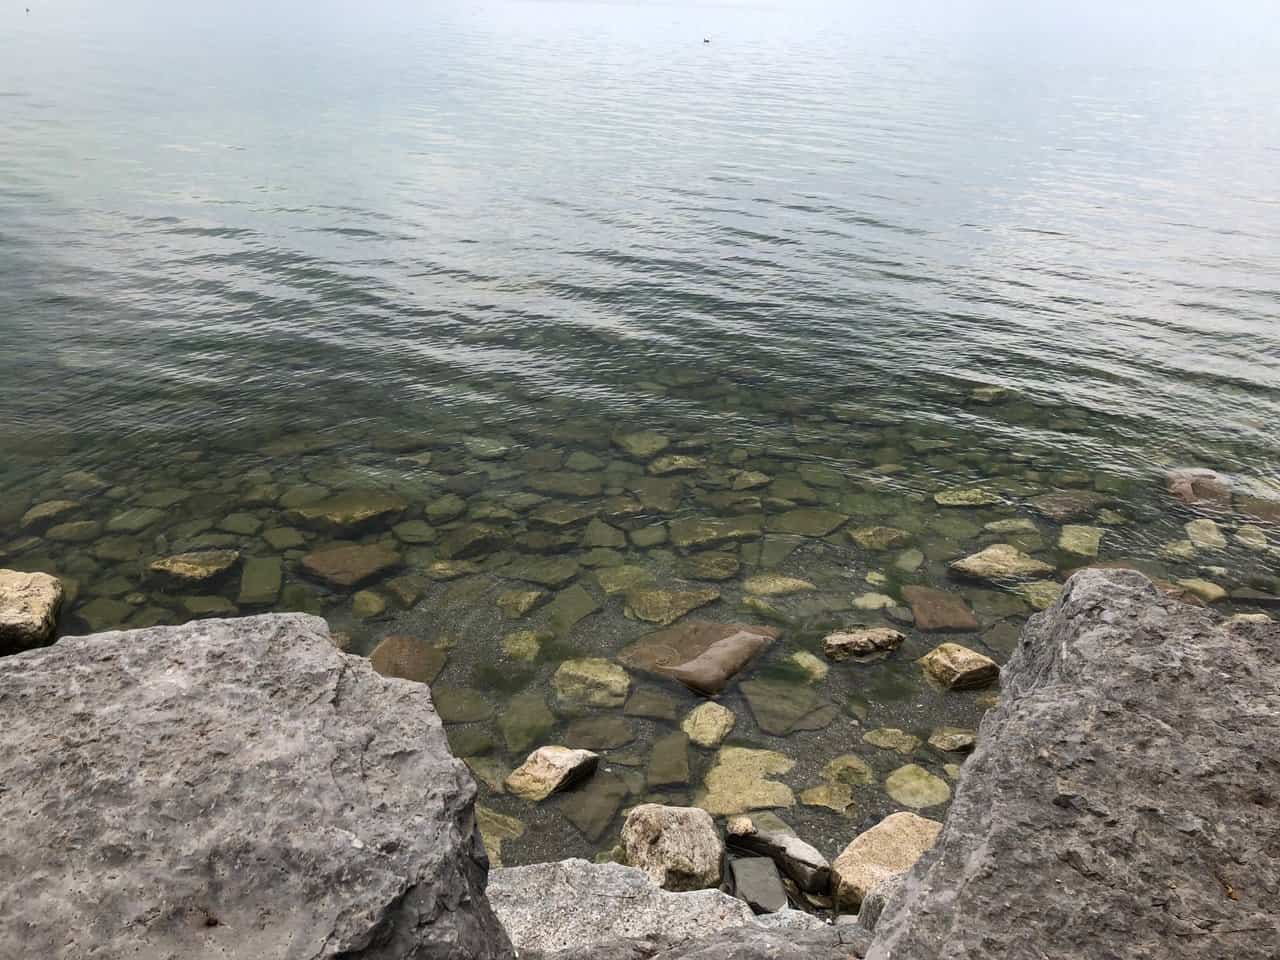 Image of large stones at the edge of Lake Ontario with smaller subsurface stone appearing through ripples on the surface, through sun and mist.